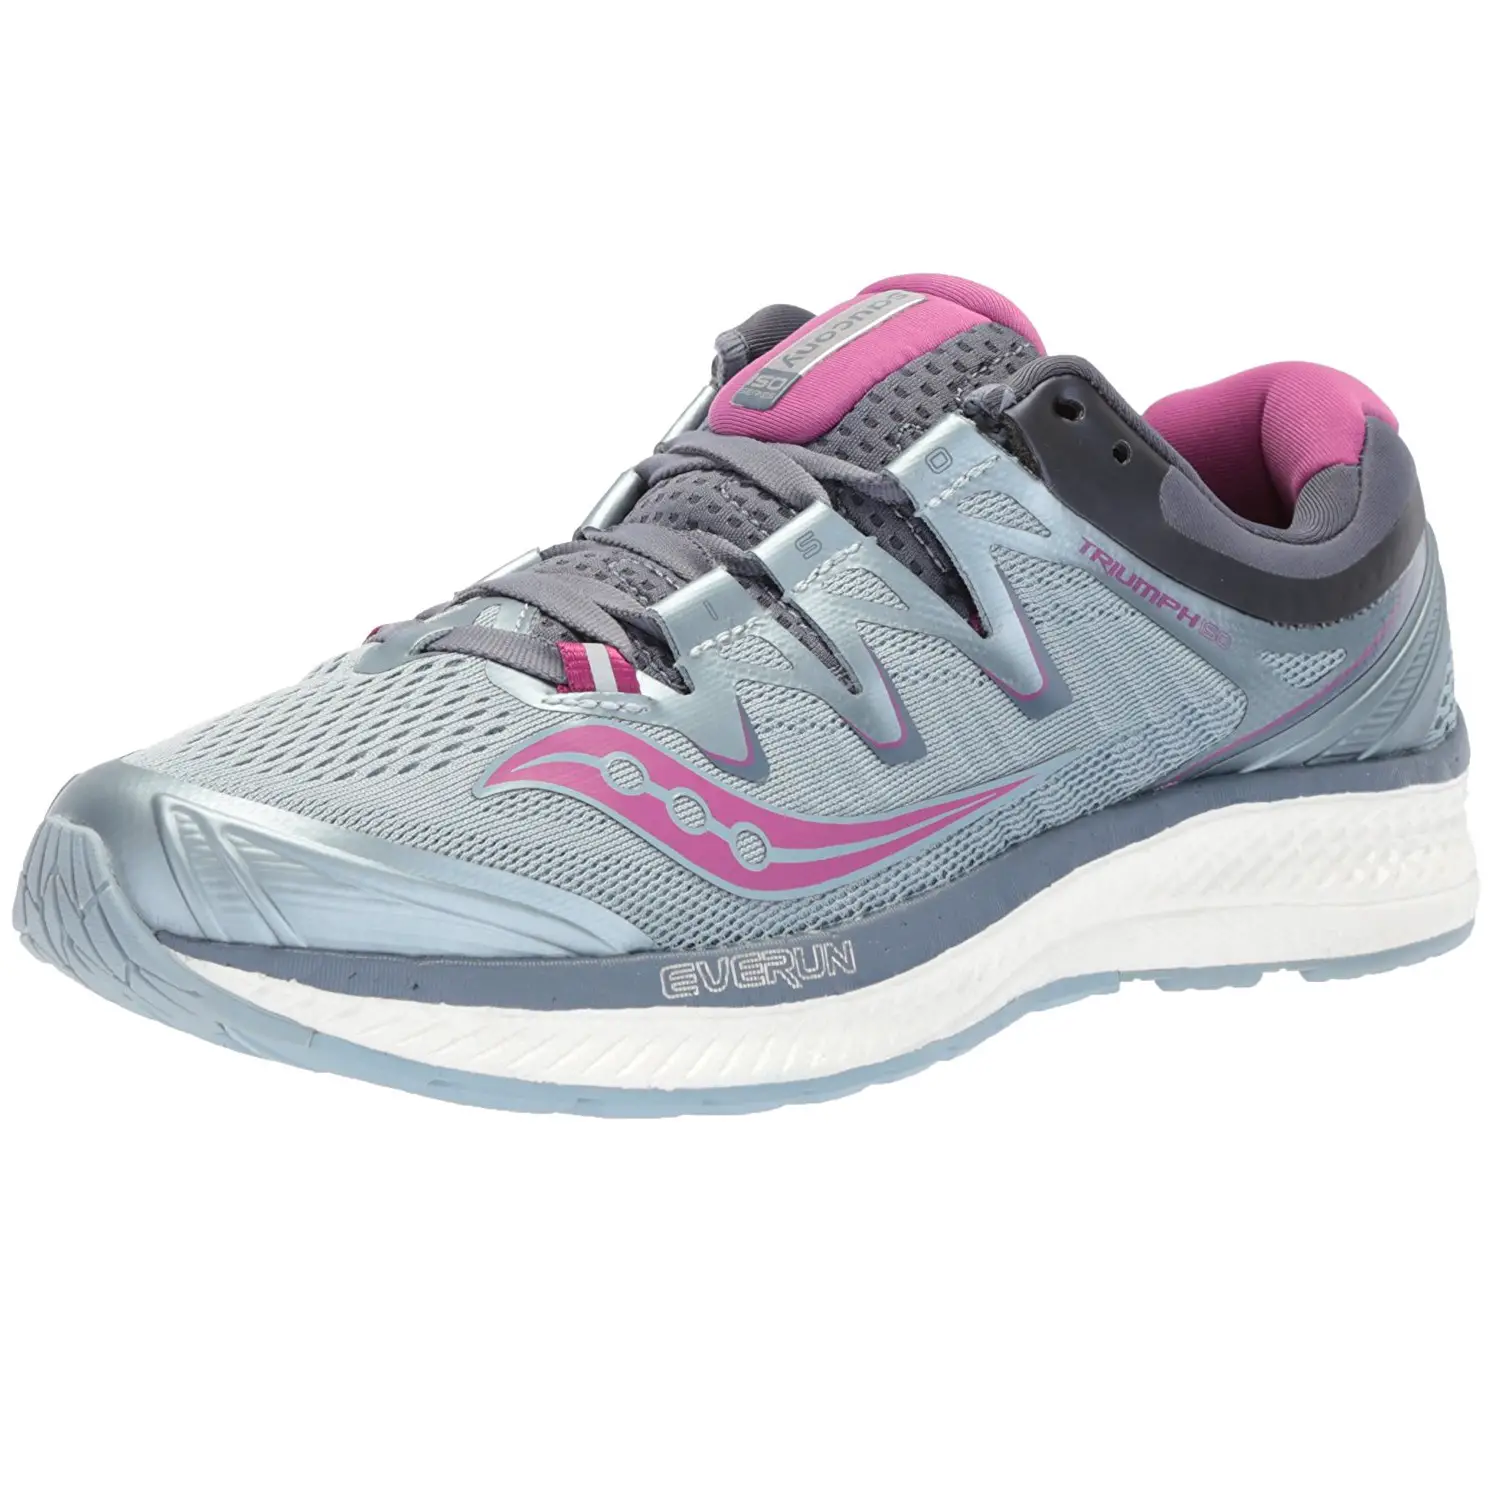 Saucony Triumph Iso 4: To Buy or Not in 